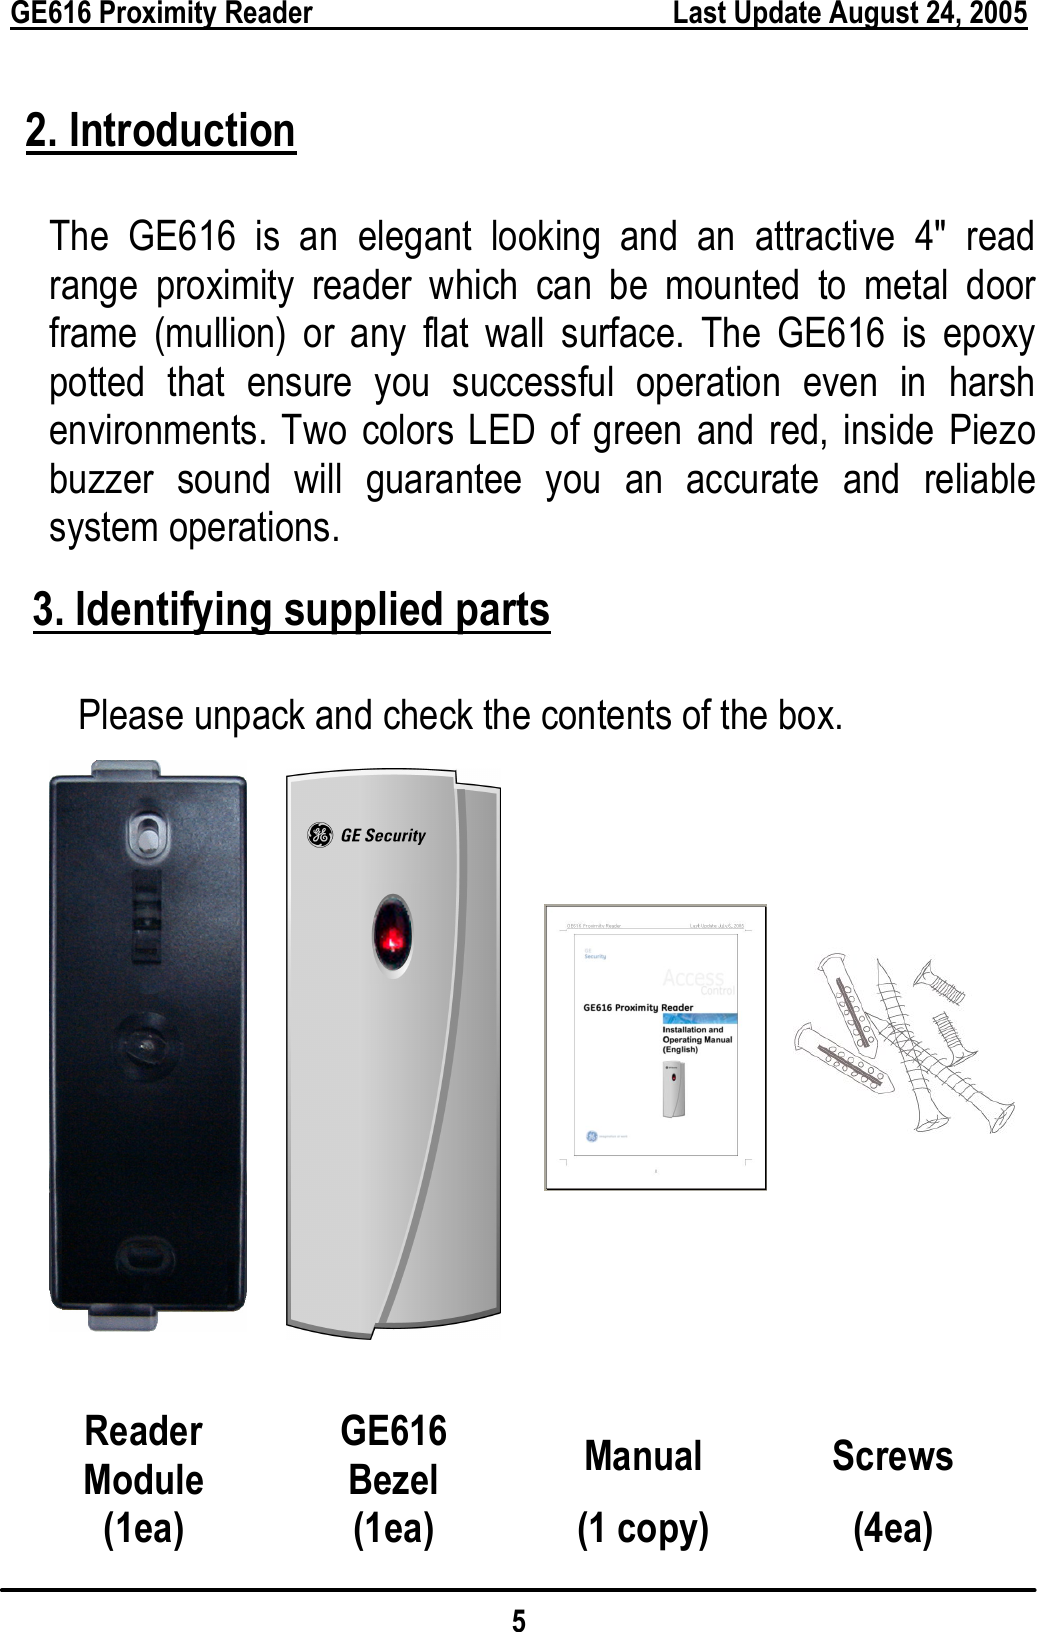  GE616 Proximity Reader        Last Update August 24, 2005 5  2. Introduction  The GE616 is an elegant looking and an attractive 4&quot; read range proximity reader which can be mounted to metal door frame (mullion) or any flat wall surface. The GE616 is epoxy potted that ensure you successful operation even in harsh environments. Two colors LED of green and red, inside Piezo buzzer sound will guarantee you an accurate and reliable system operations.  3. Identifying supplied parts  Please unpack and check the contents of the box.                  Reader Module GE616 Bezel  Manual Screws (1ea) (1ea) (1 copy) (4ea) 